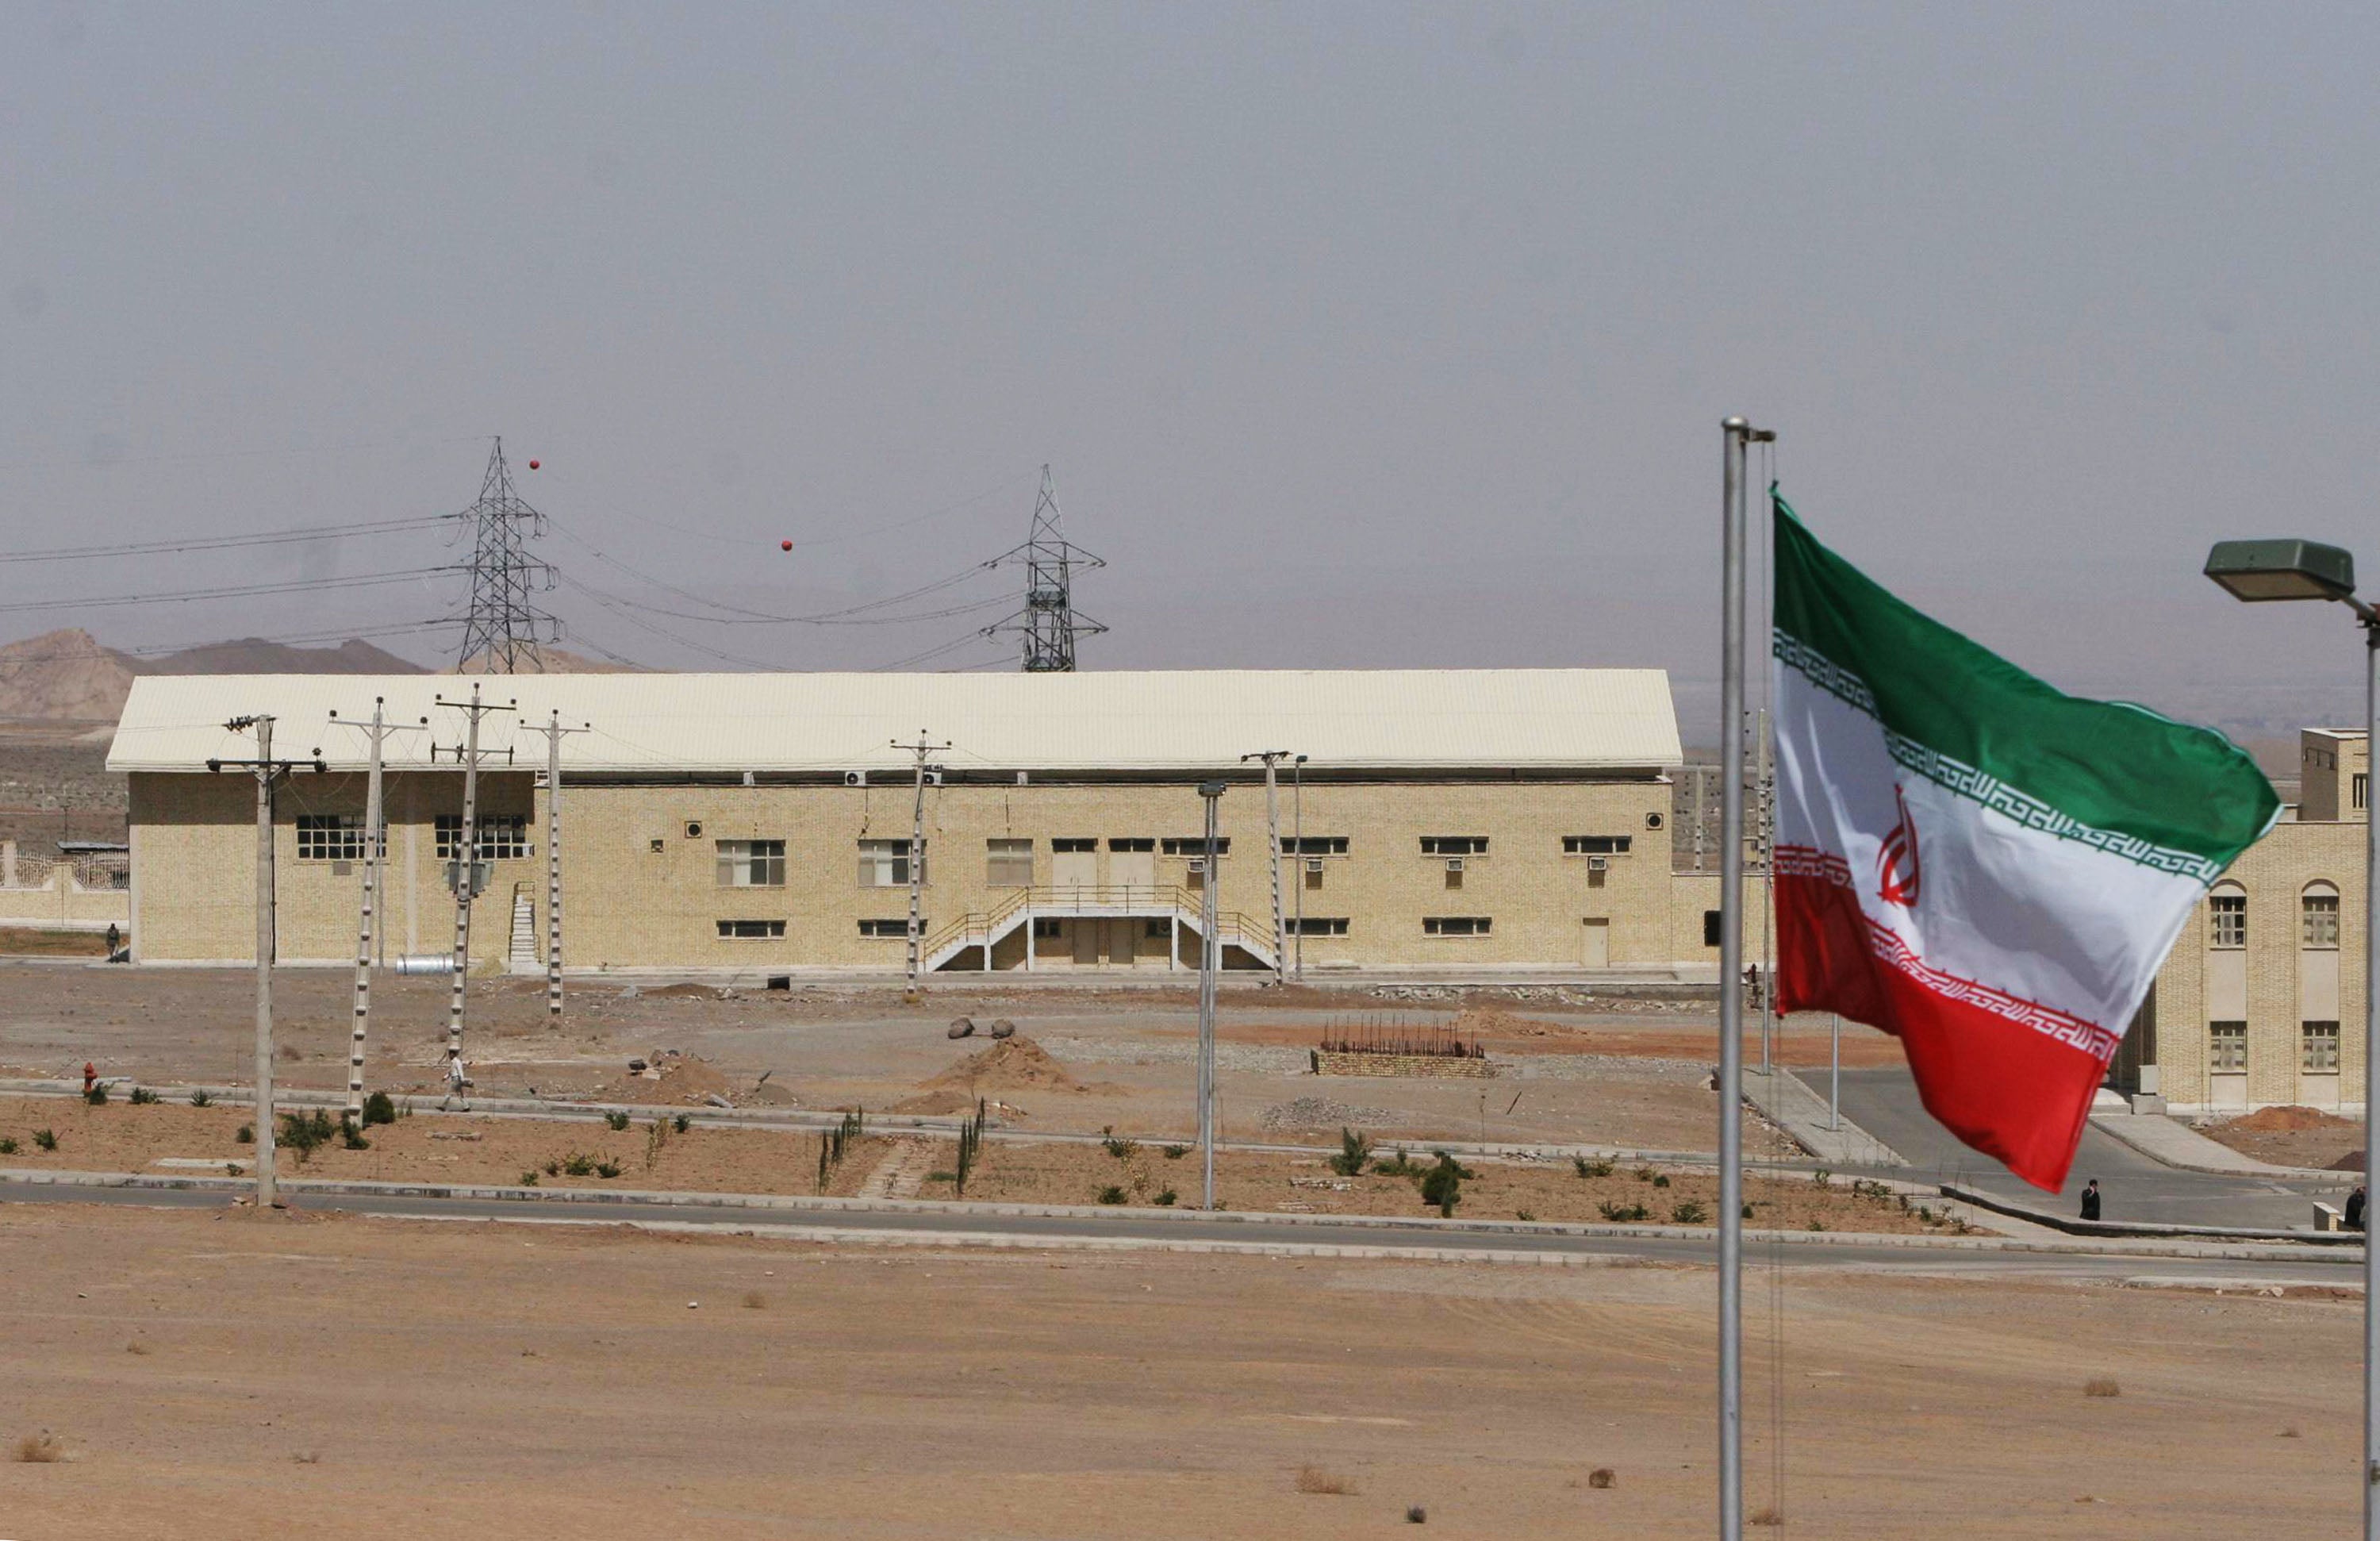 Although Iran has nuclear facilities, it has “no credible civilian need for uranium metal R&D and production,” according to a statement by the UK, France and Germany